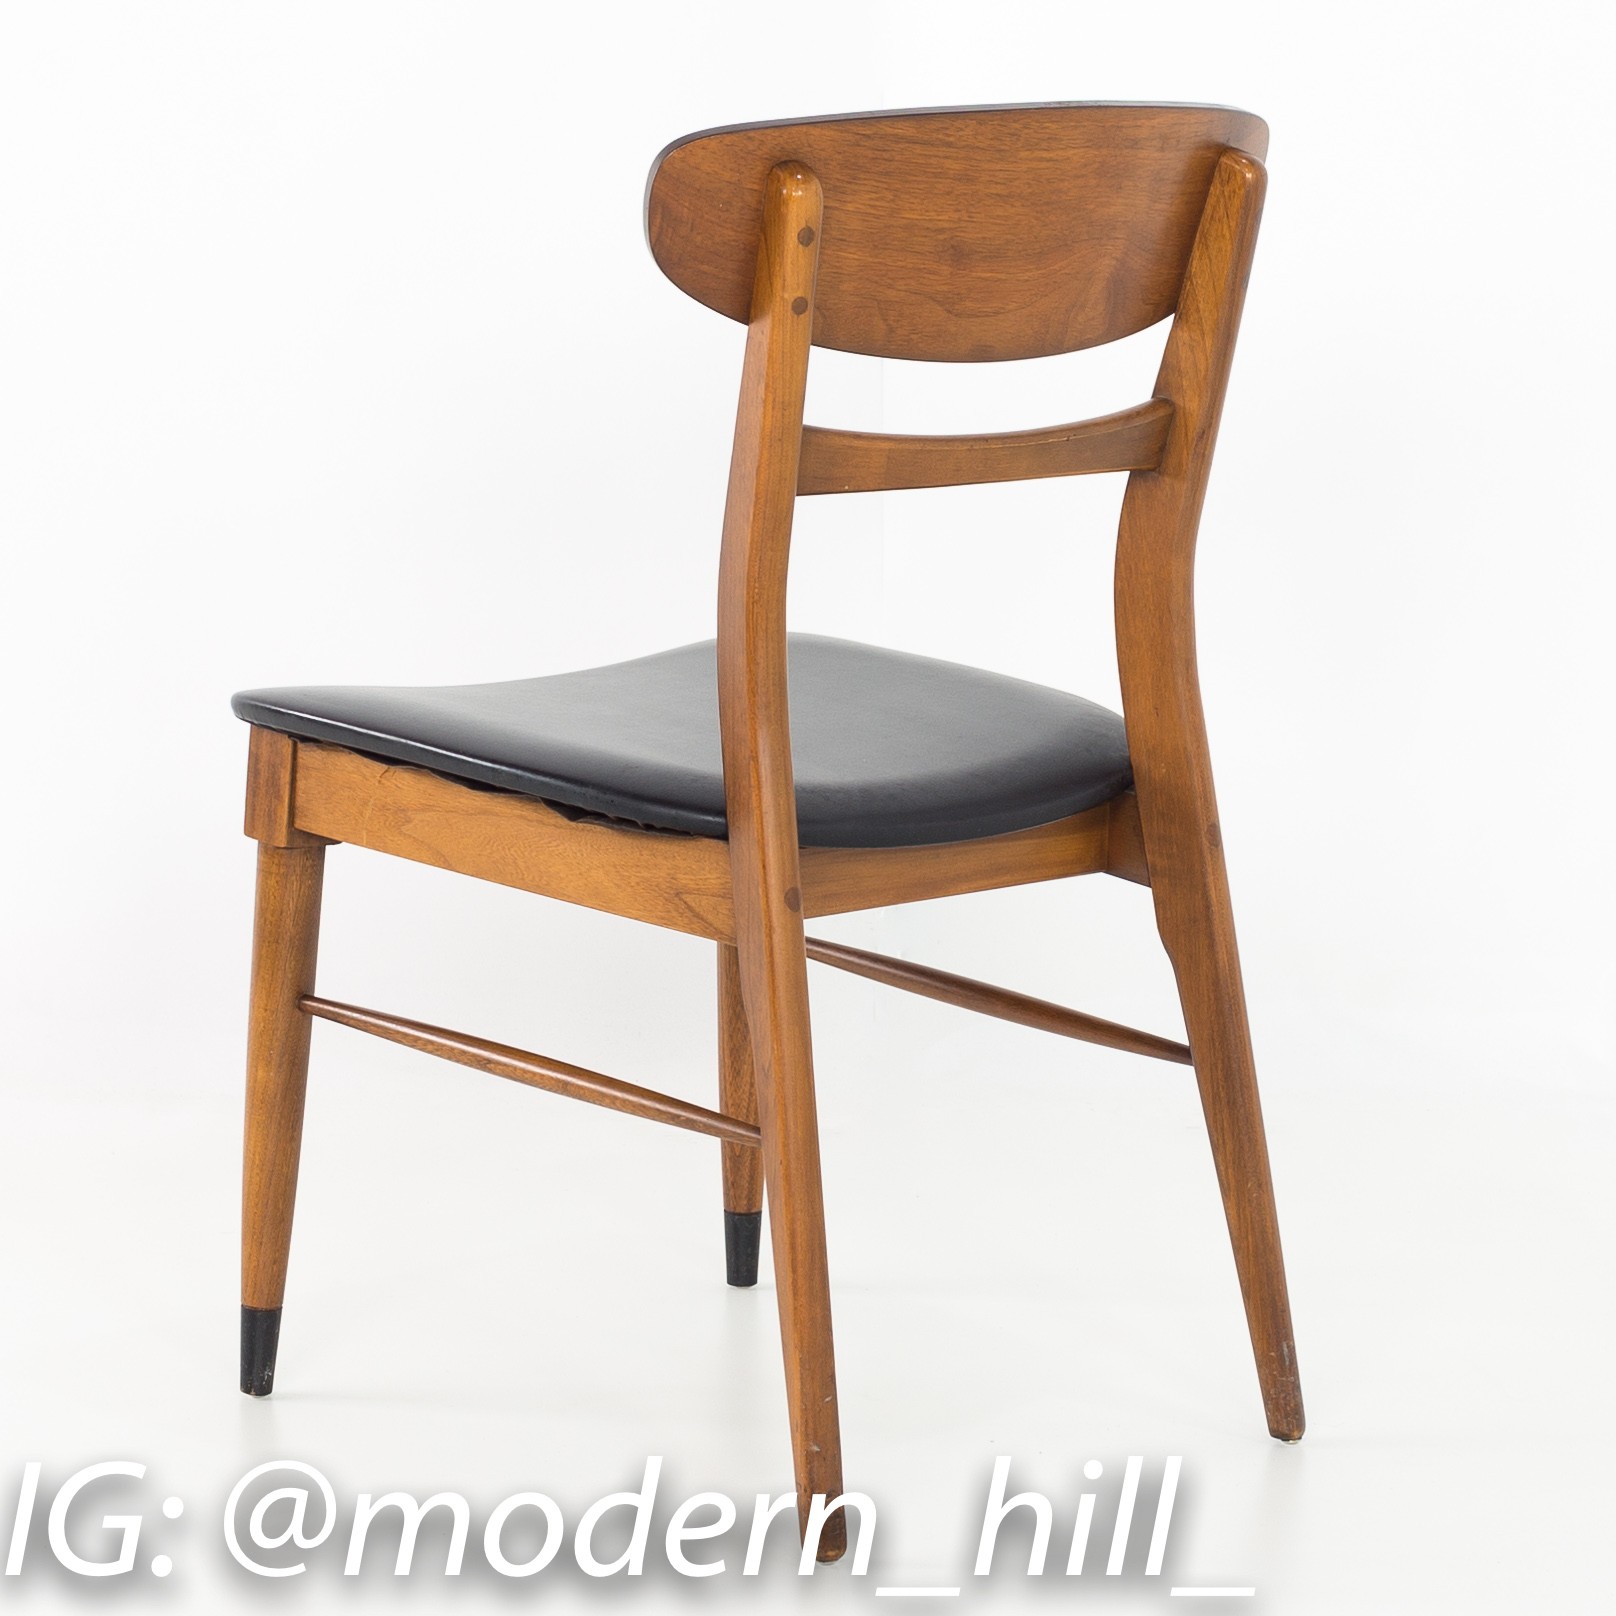 Andre Bus for Lane Acclaim Mid Century Walnut Dovetail Dining Chairs - Set of 6